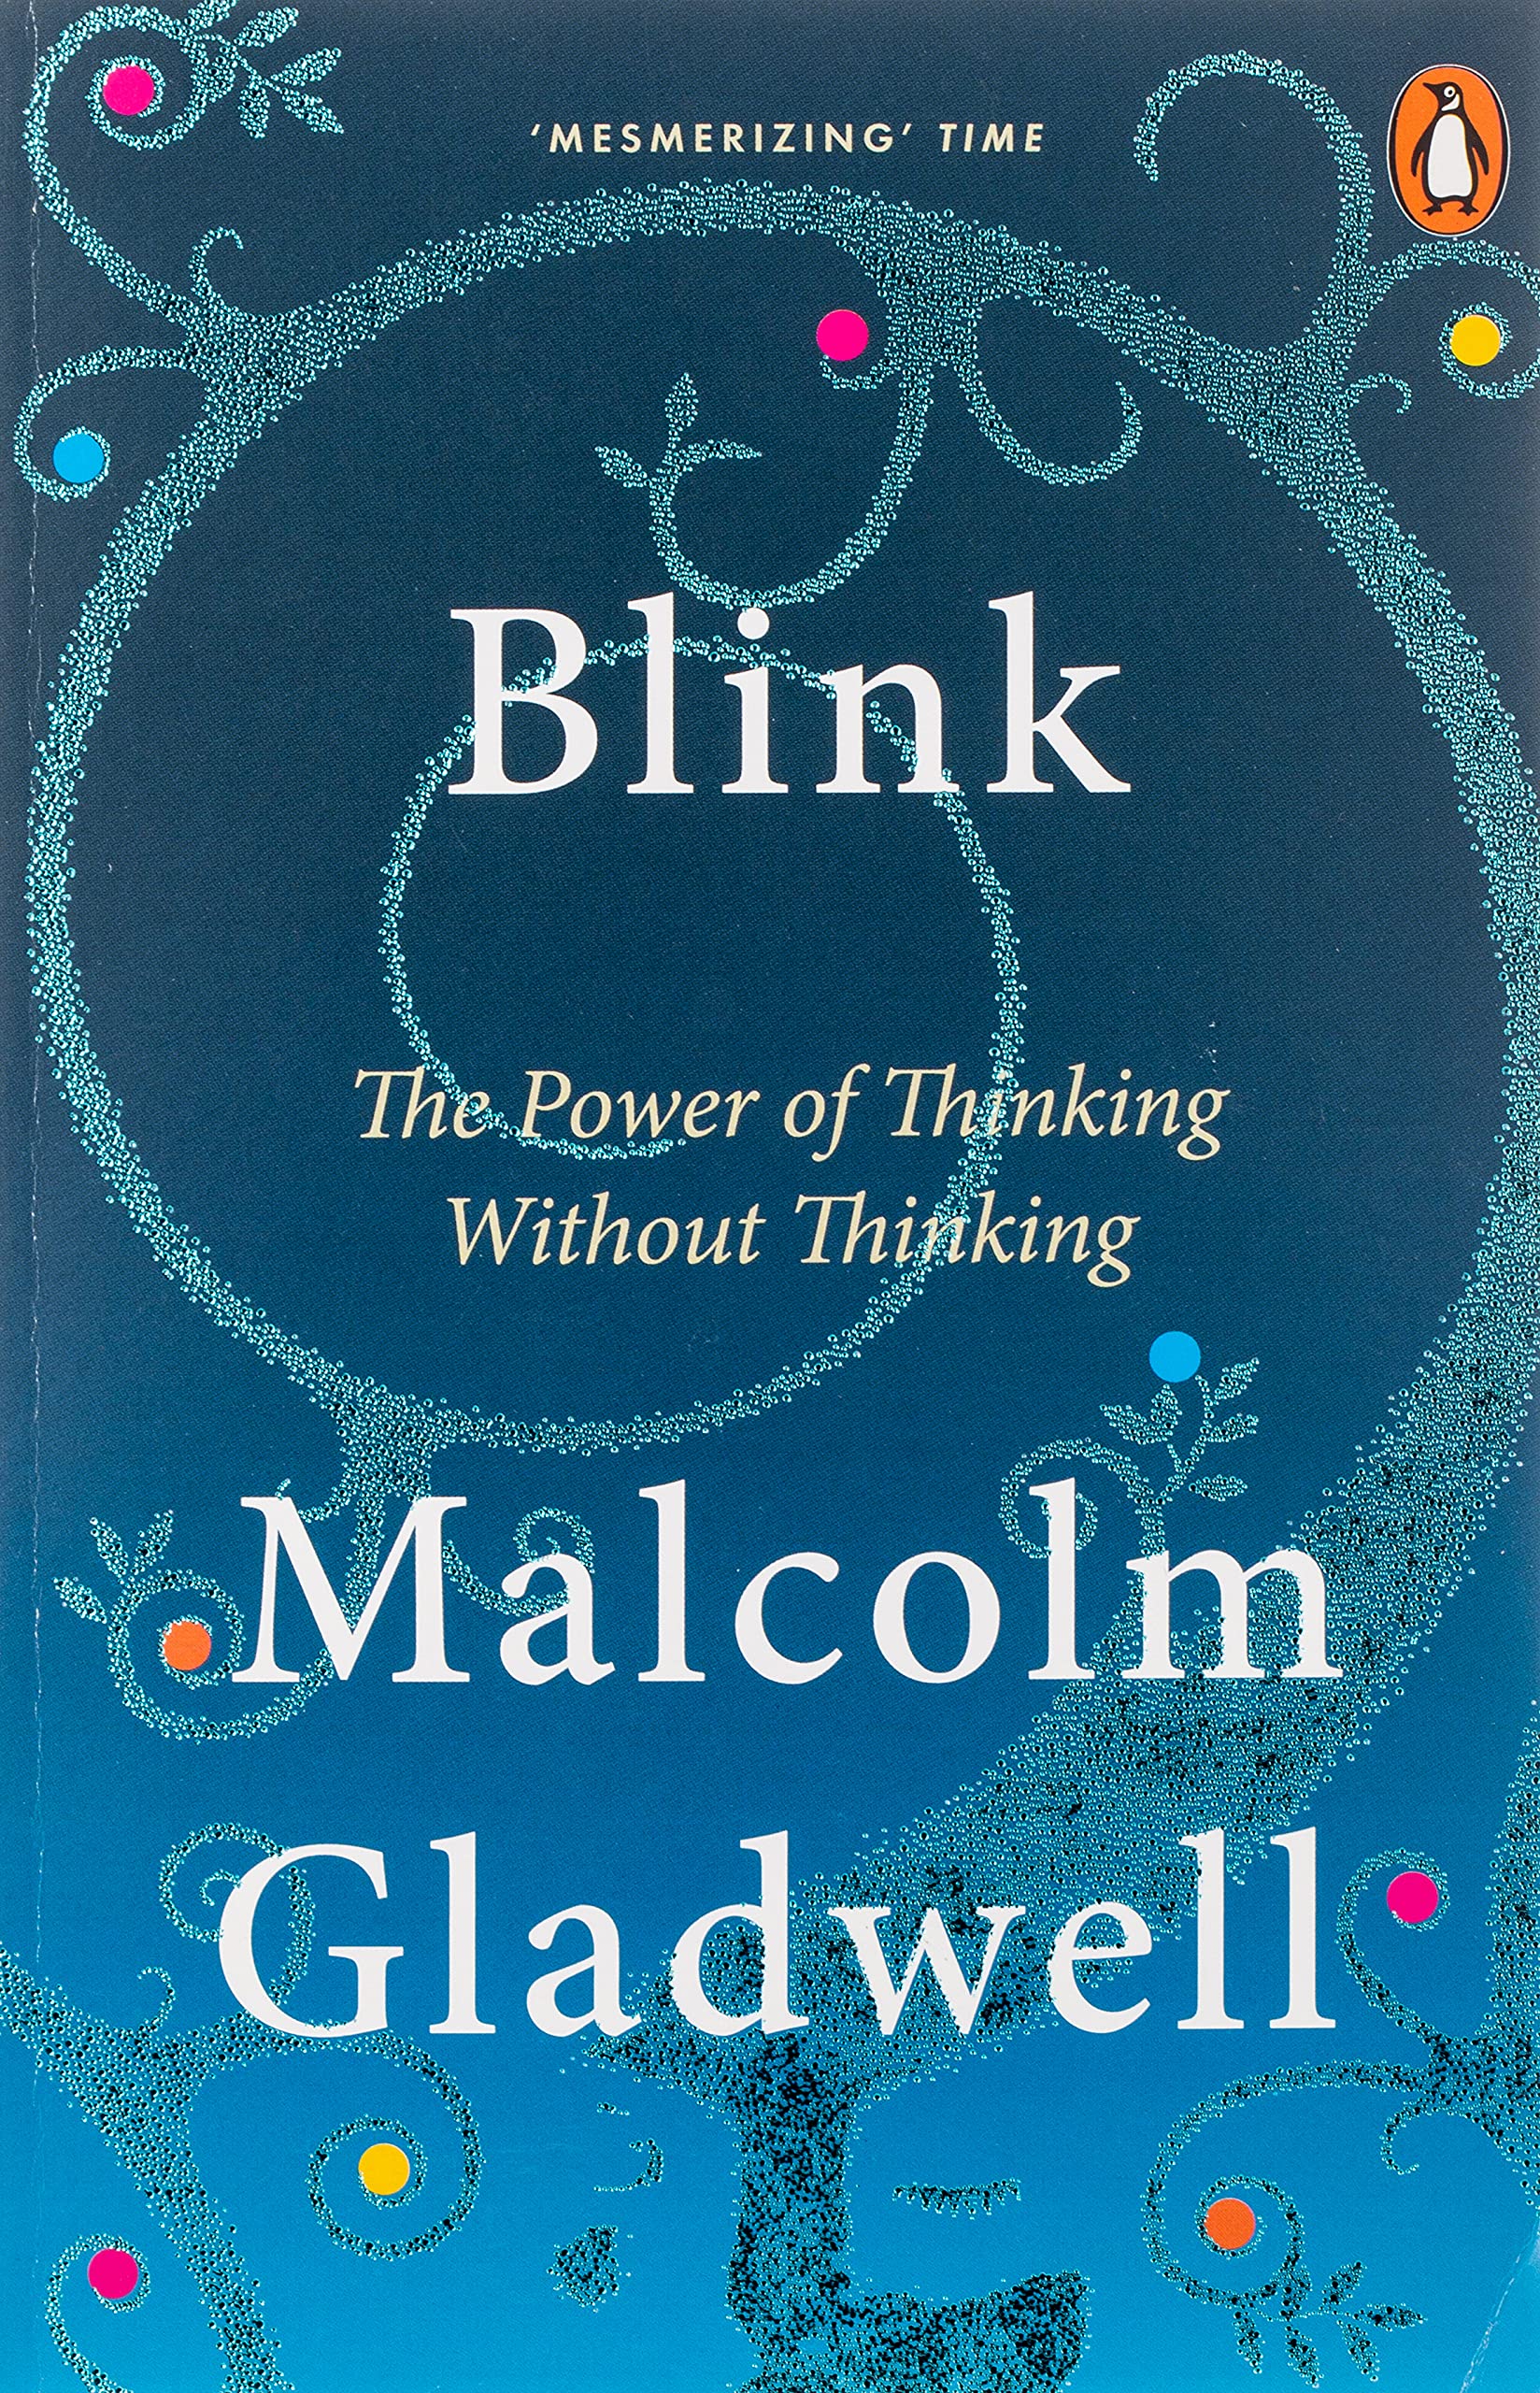 Blink: The Power Of Thinking Without Thinking